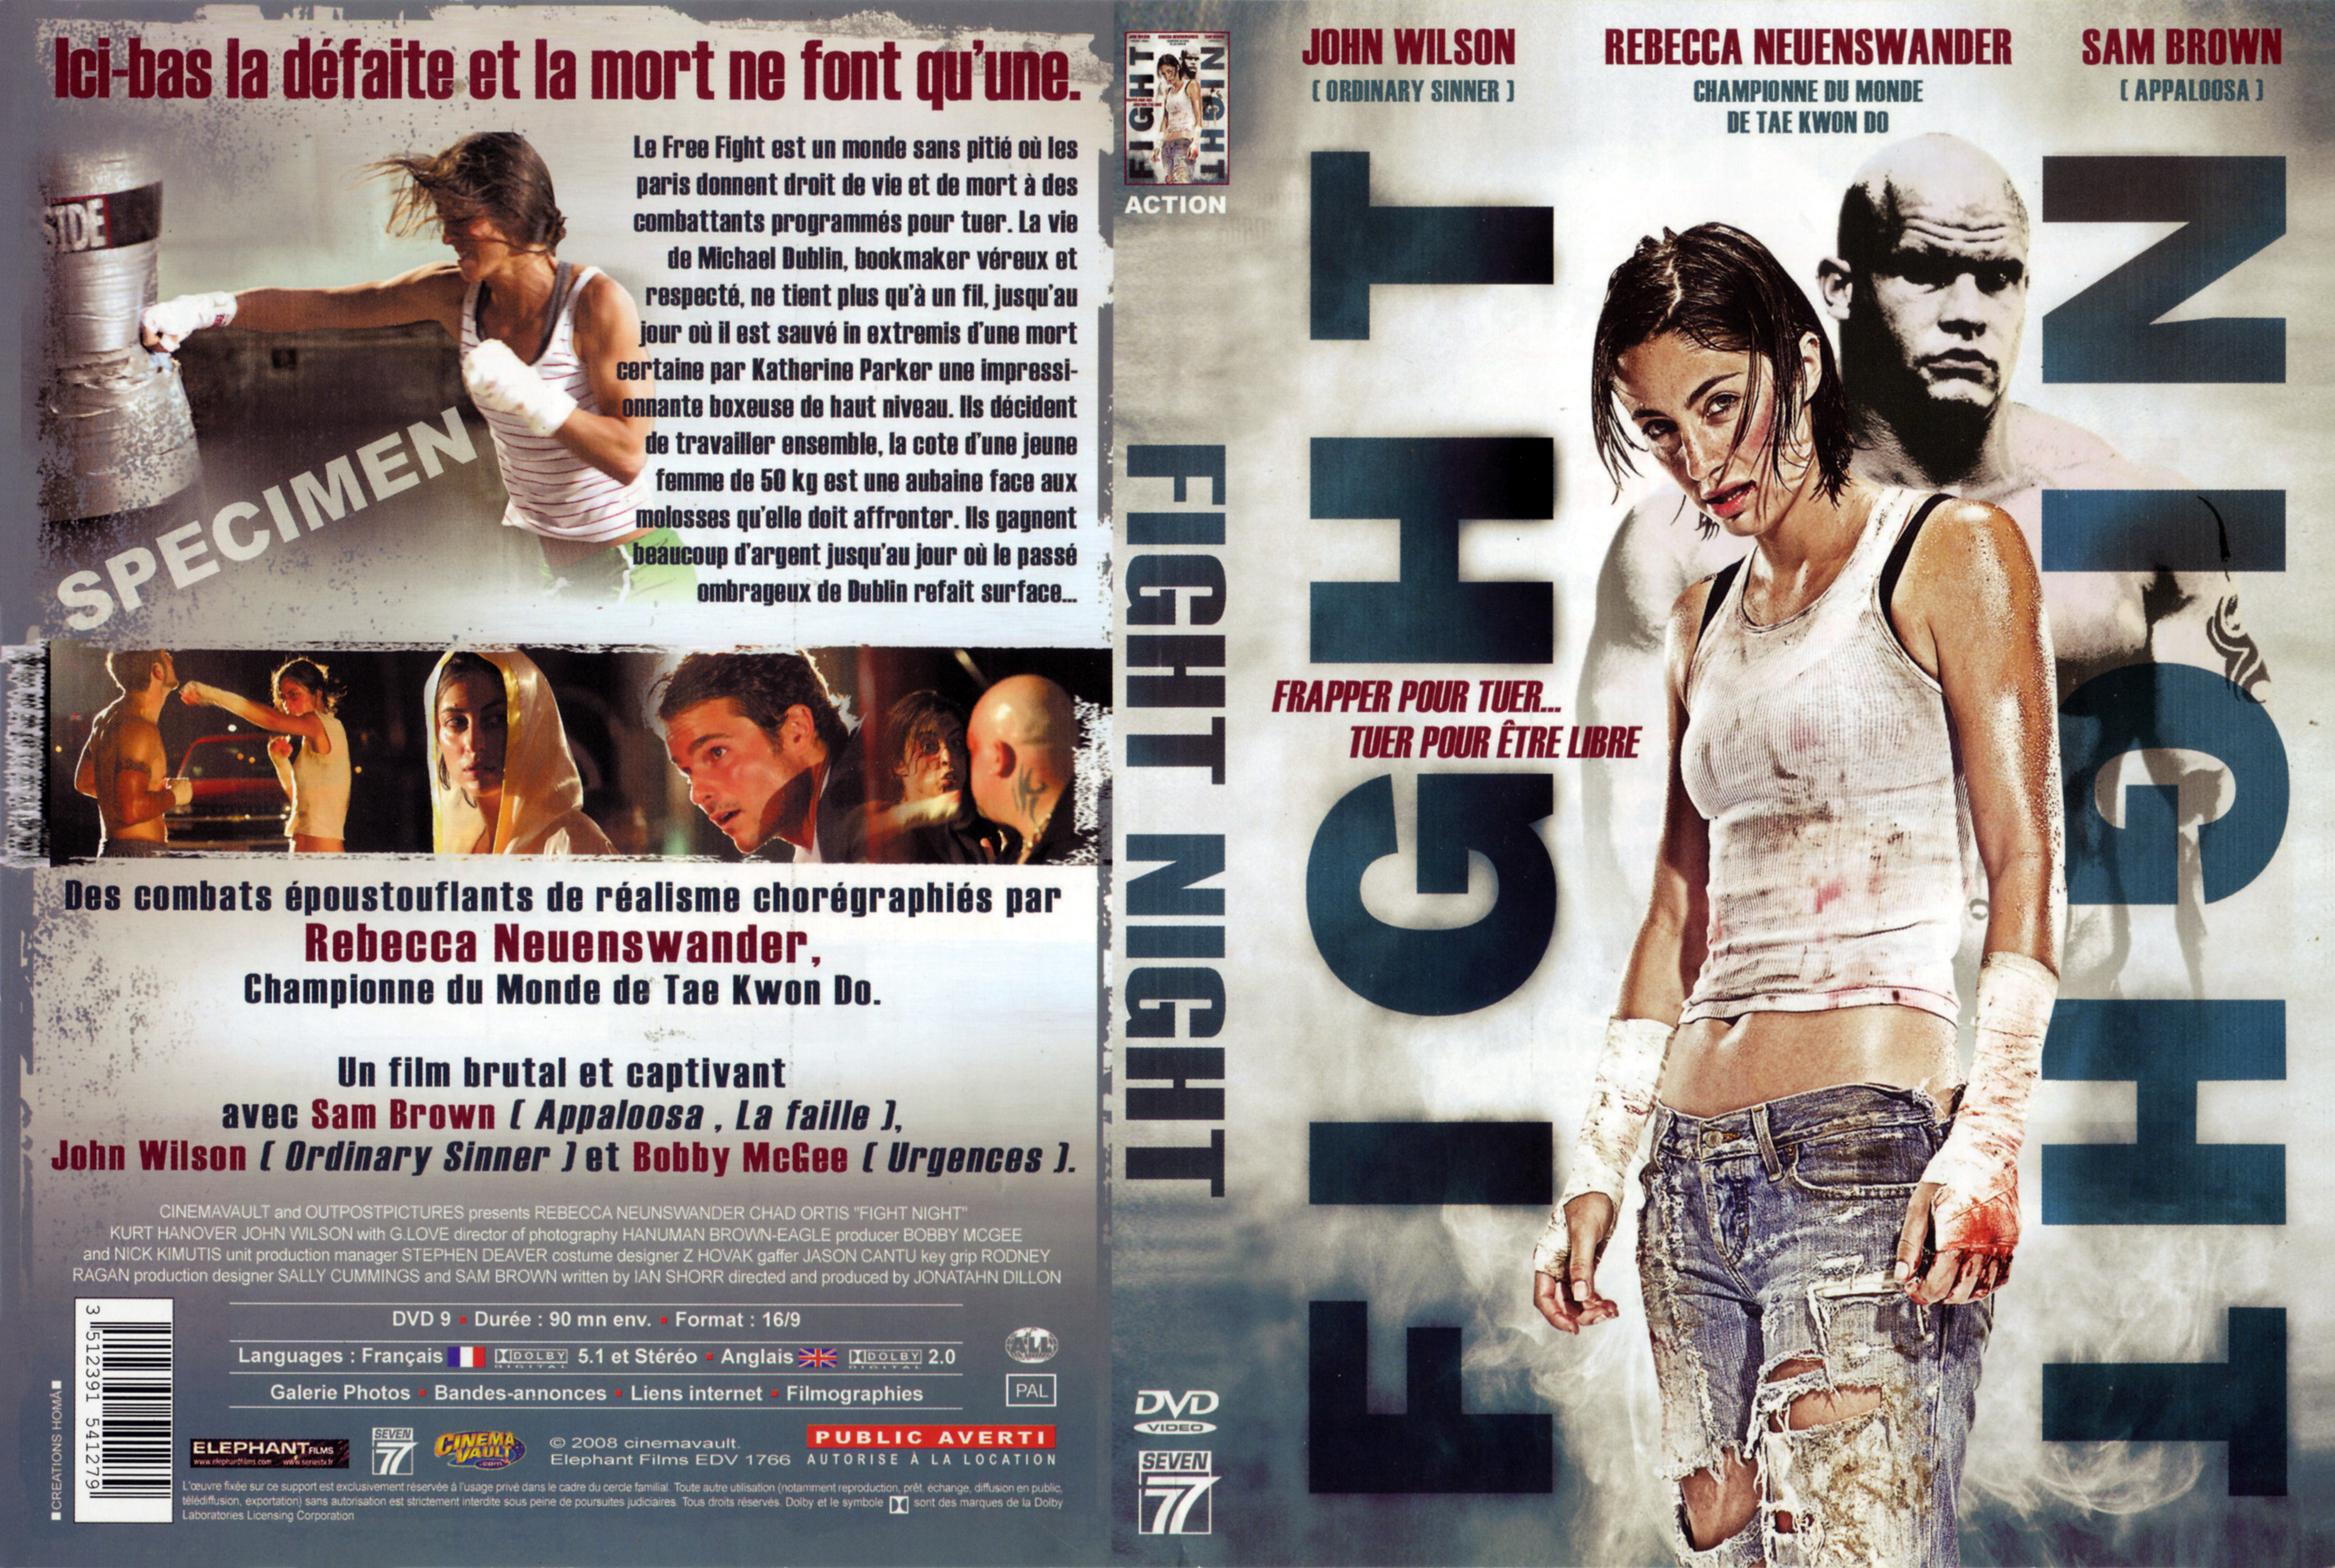 Jaquette DVD Fight night